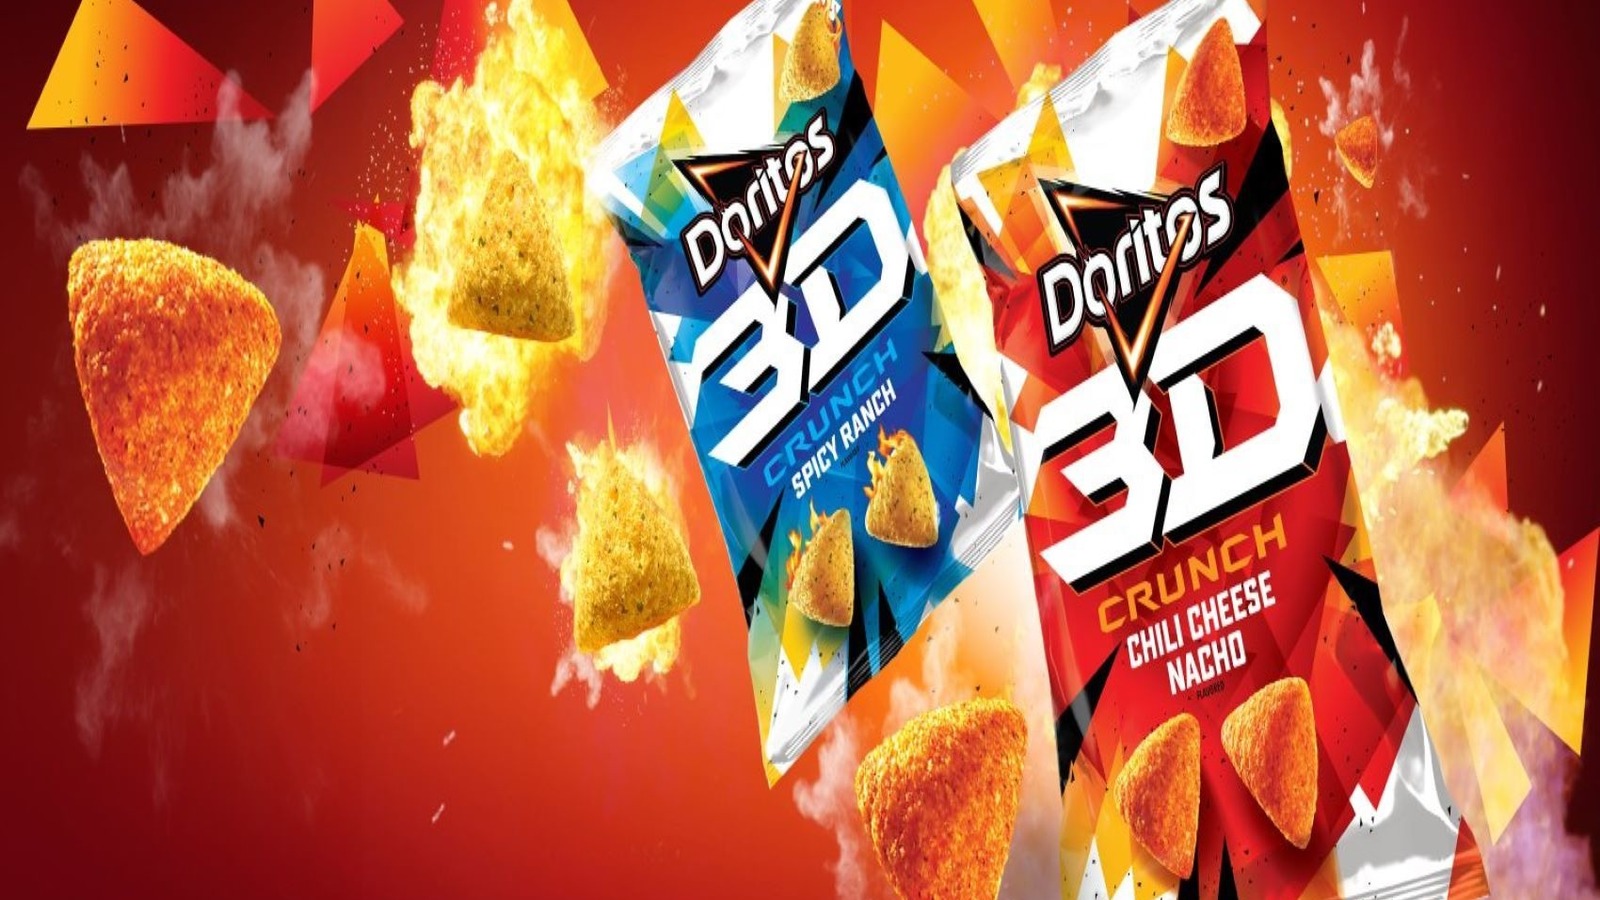 Here's Where You Know That Doritos 3D Super Bowl Commercial Song From